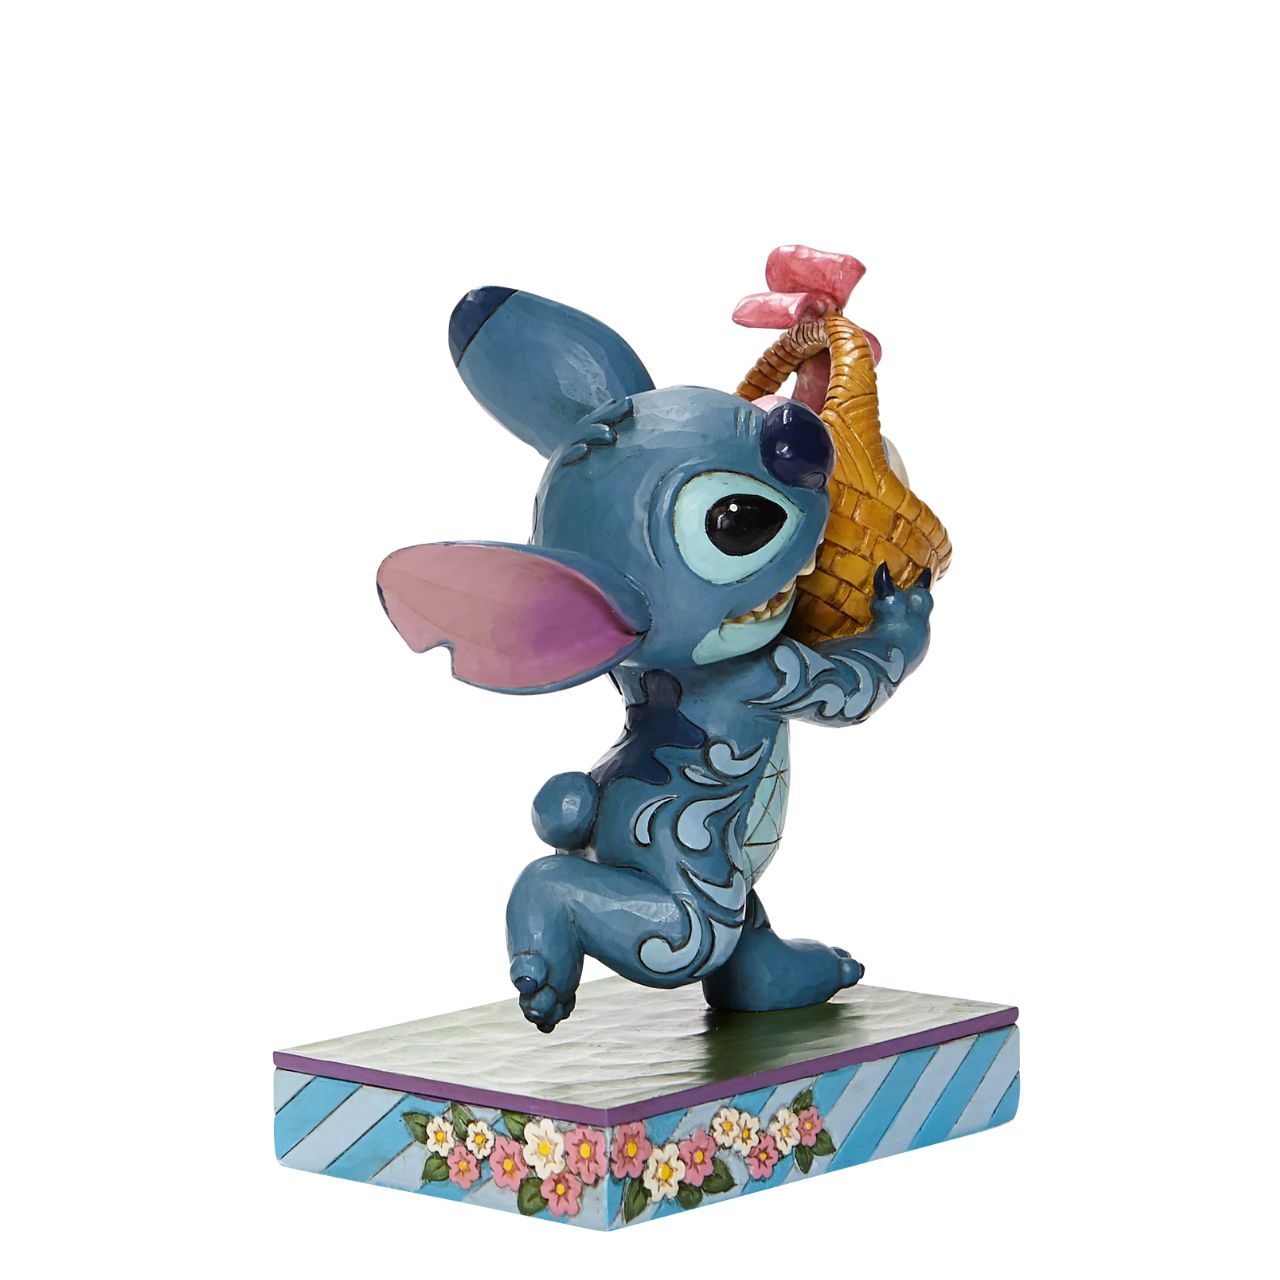 Jim Shore Bizarre Bunny - Stitch Running off with Easter Basket Figurine  Mischievous Stitch has taken off with your Easter basket so try and catch him if you can or entice him with his favourite, "Coconut Cake"| Designed by Jim Shore, this fun-loving Disney Traditions piece is hand-painted in cheery springtime hues.